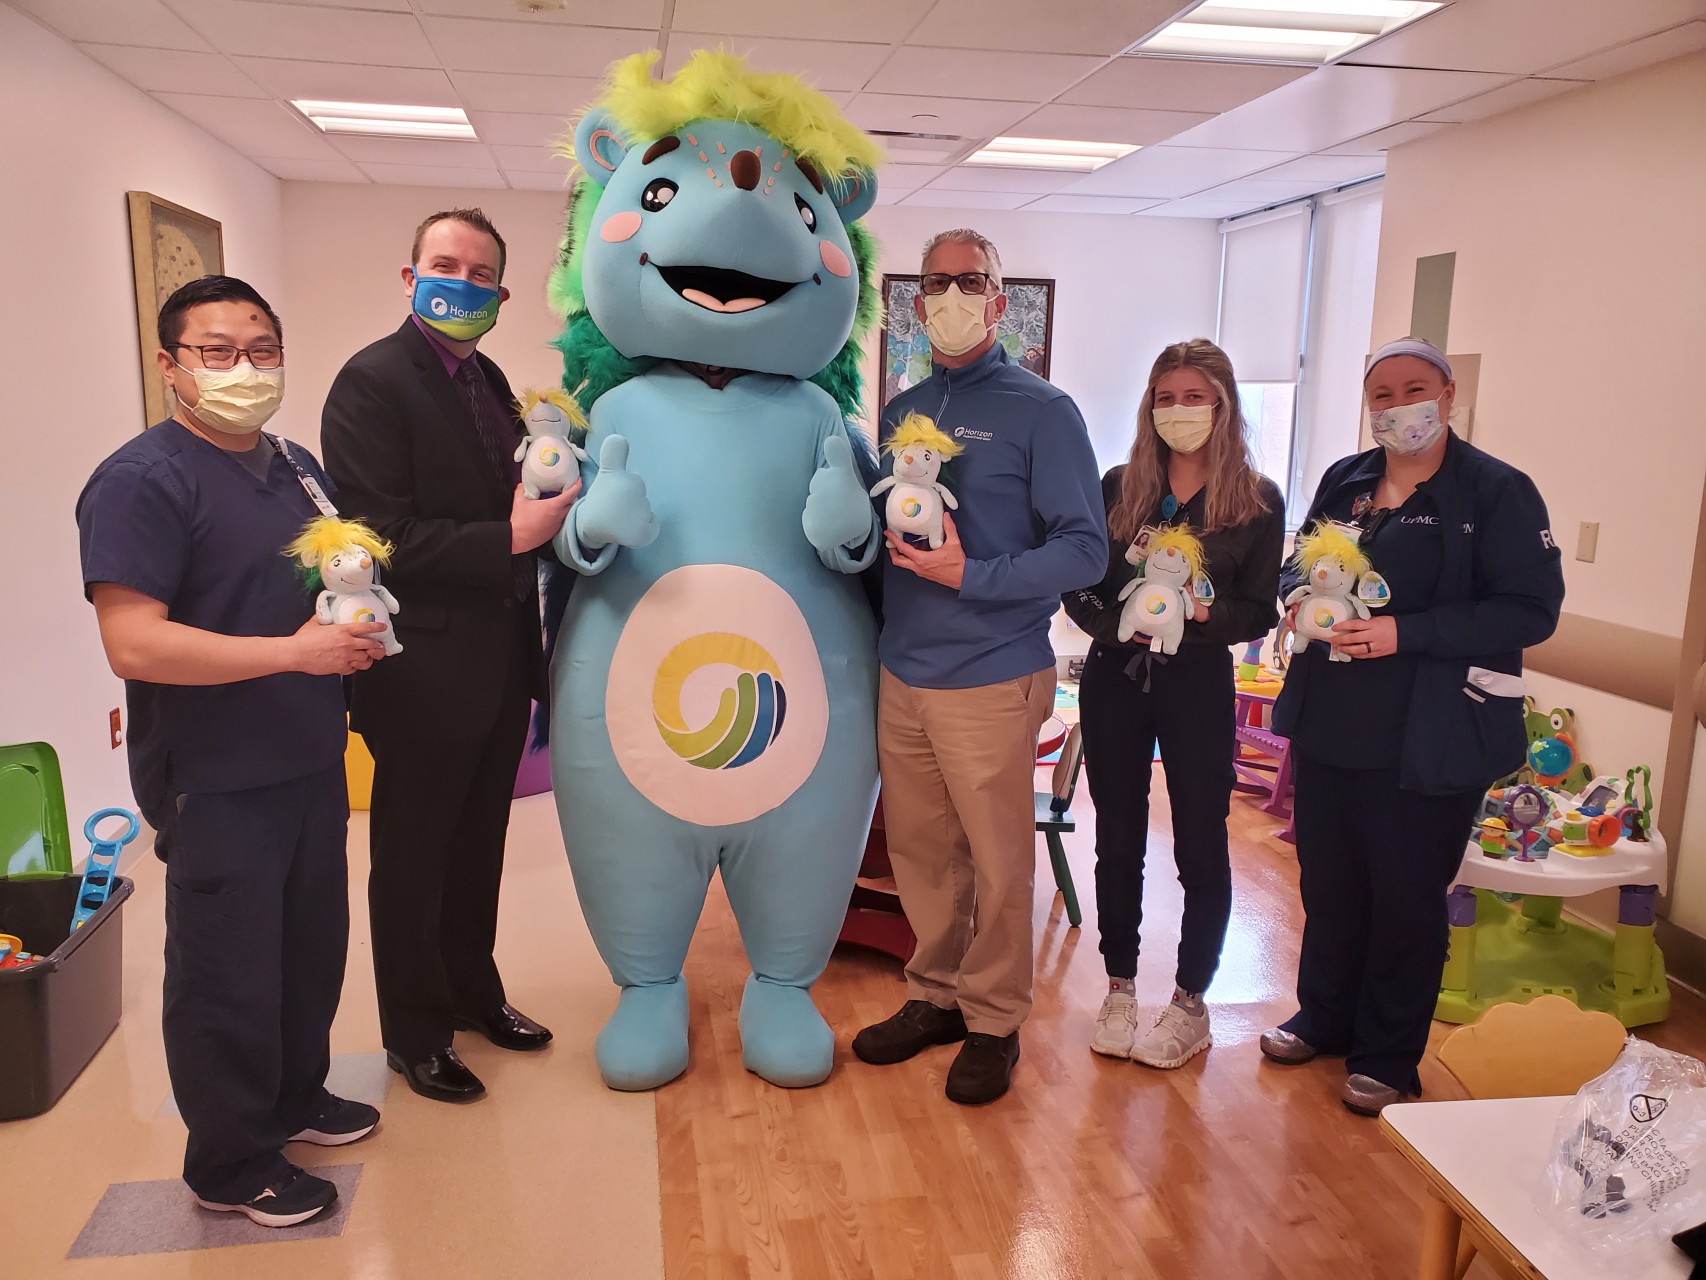 UPMC staff and Horizon employees with stuffed Hedgie